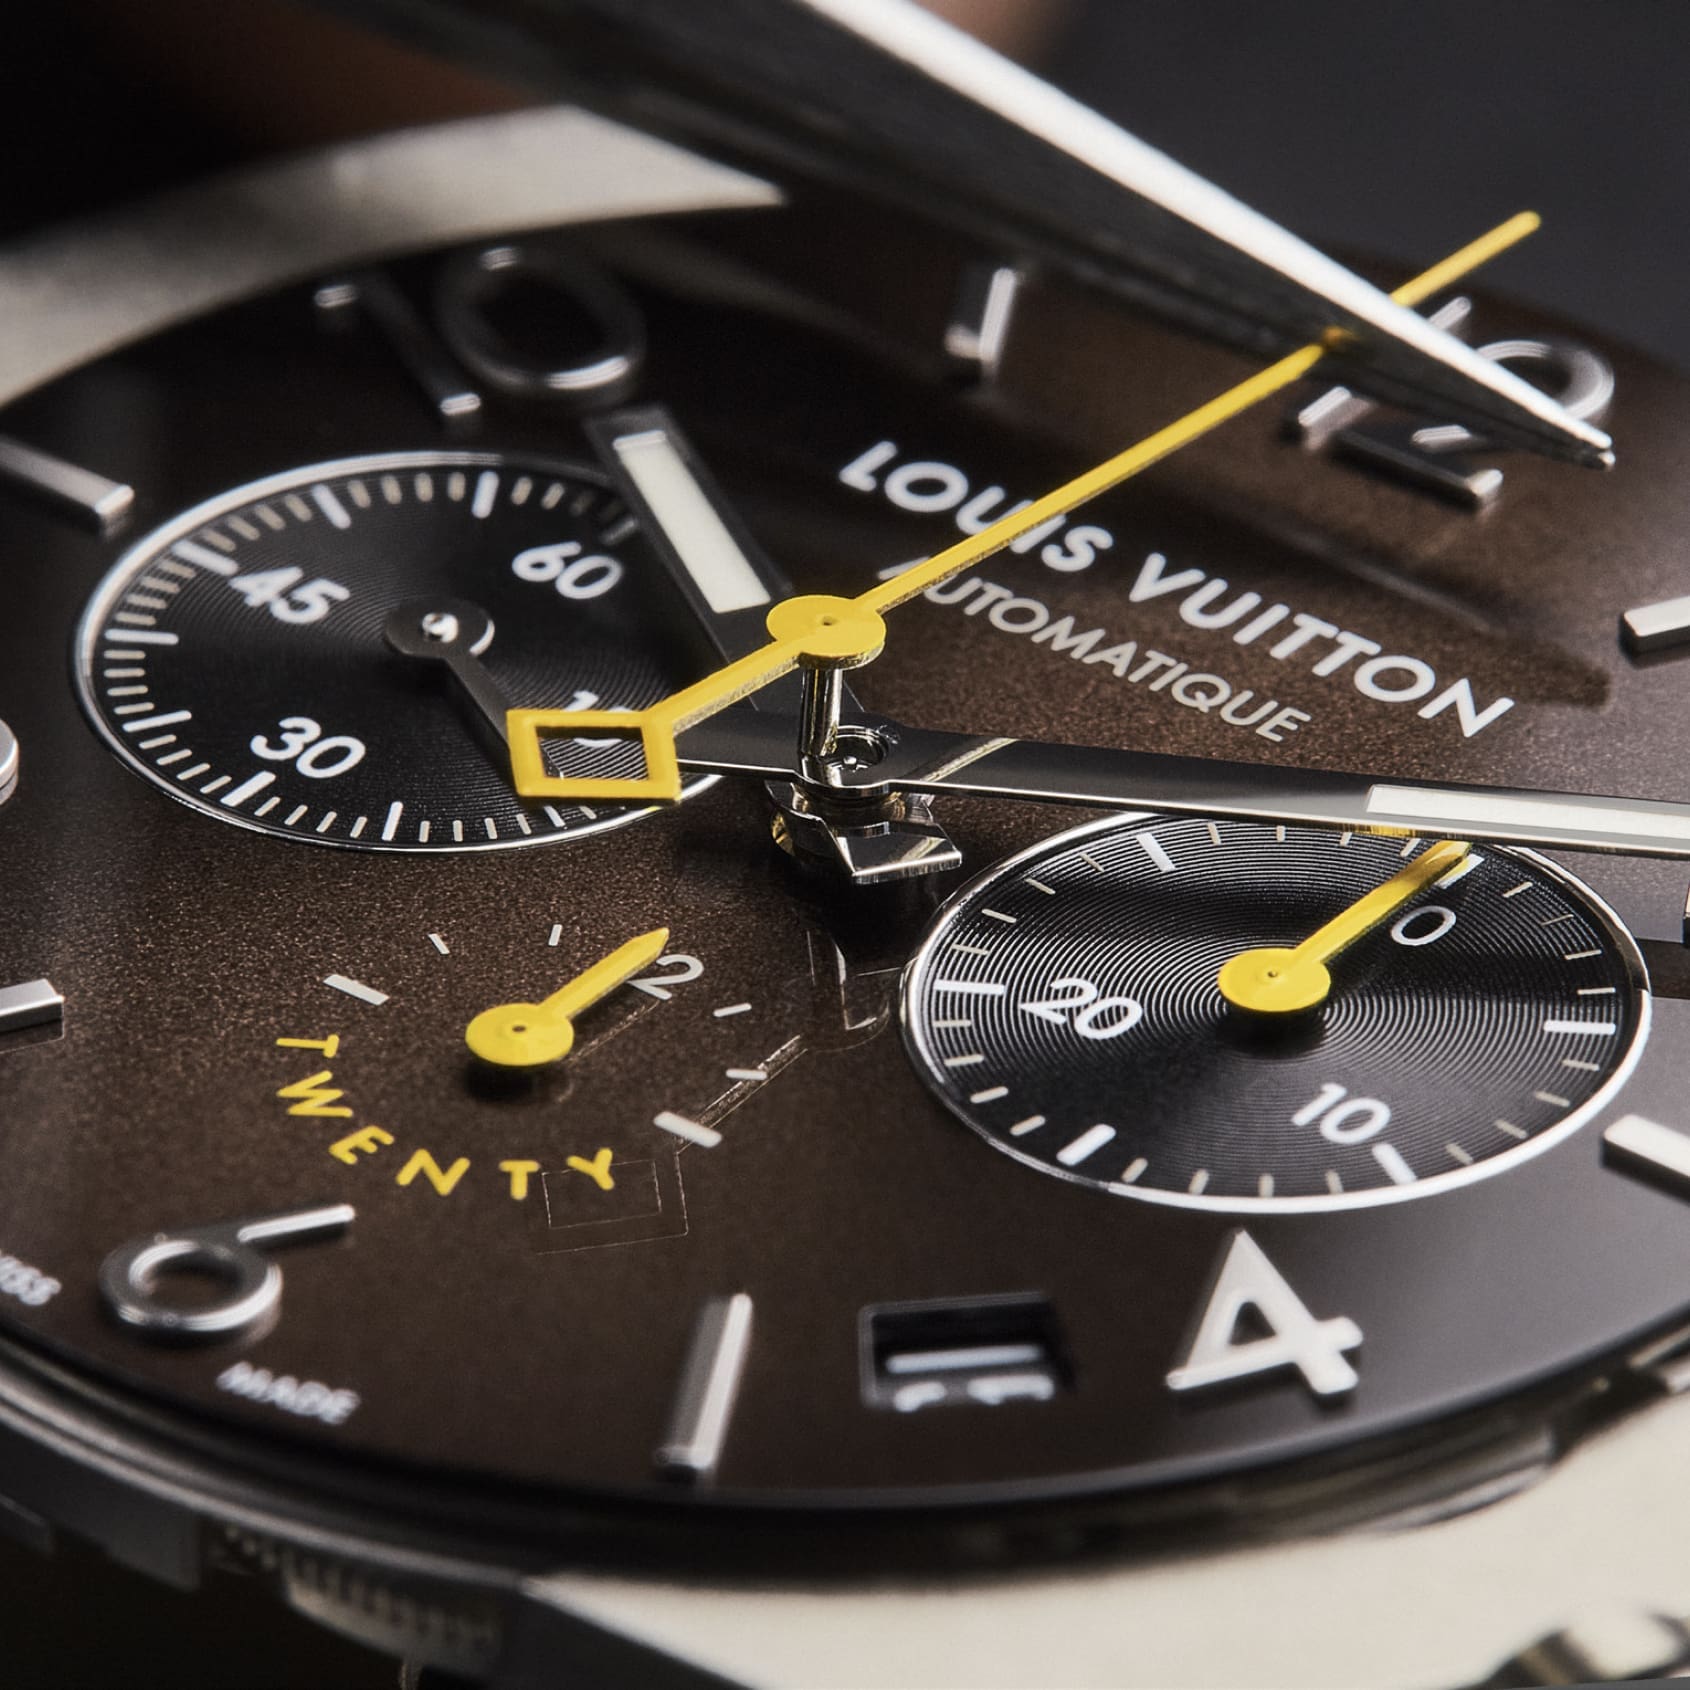 VIDEO: Exploring the deep-cased majesty of the Louis Vuitton Tambour Twenty